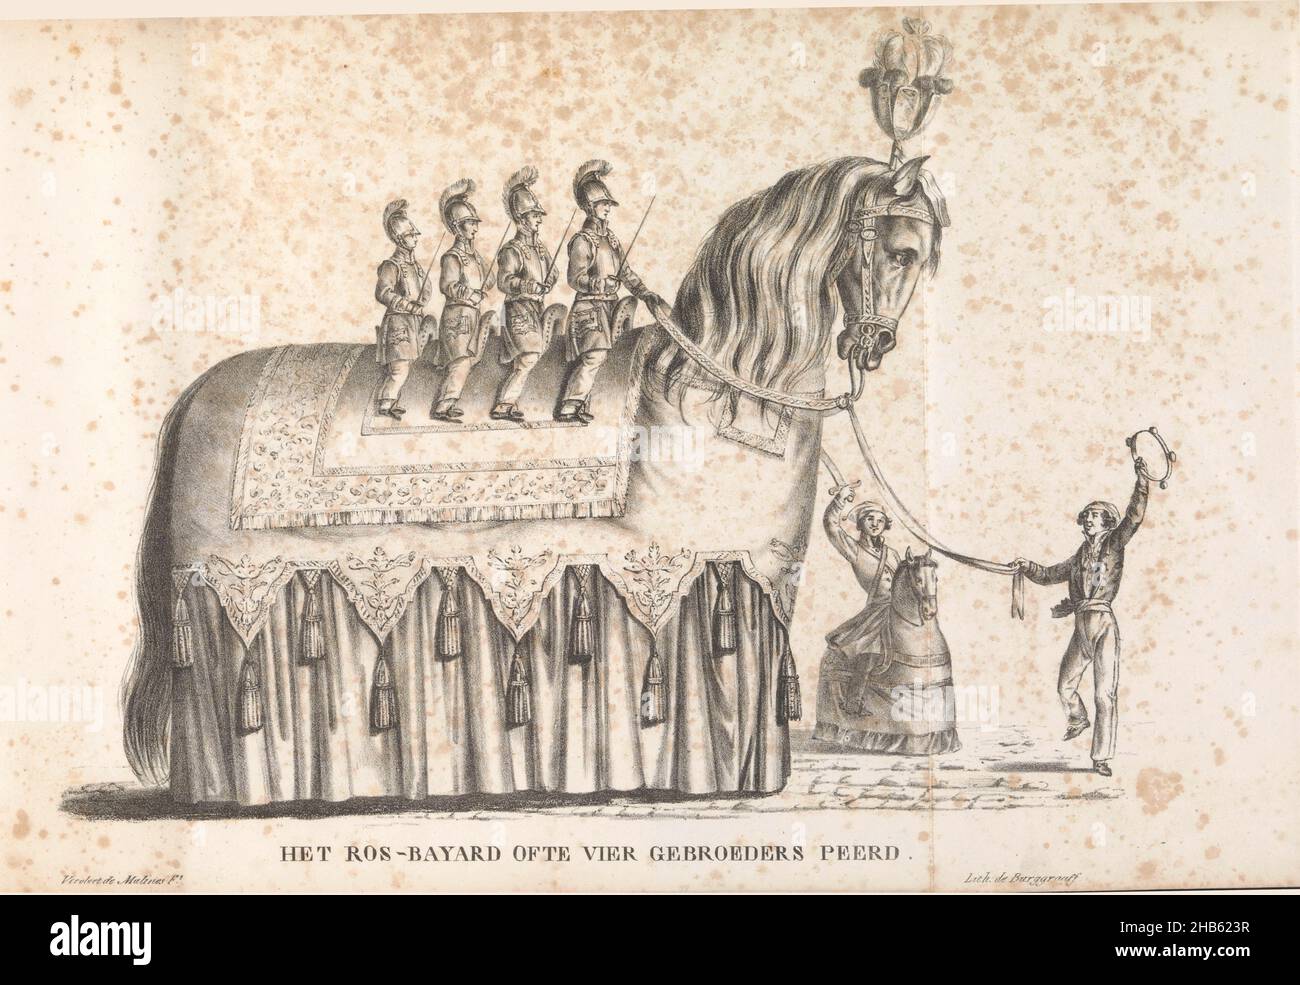 Ros Beiaard as a float in the procession for Saint Rombout, 1825, The Ros-Bayard ofte Vier Gebroeders Peerd (title on object), A float in the form of the horse Ros Beiaard on which the four Heemskinderen ride. Part of the circumambulation for Saint Rombout. The procession was held on June 28, July 5 and 12, 1825. Illustration in a publication to mark the 50th anniversary in 1825 of the jubilee of Saint Rumoldus or Rombout, patron saint of the city of Mechelen., print maker: Frans Vervloet (mentioned on object), printer: Burggraaff (mentioned on object), print maker: Mechelen, printer: Brussels Stock Photo